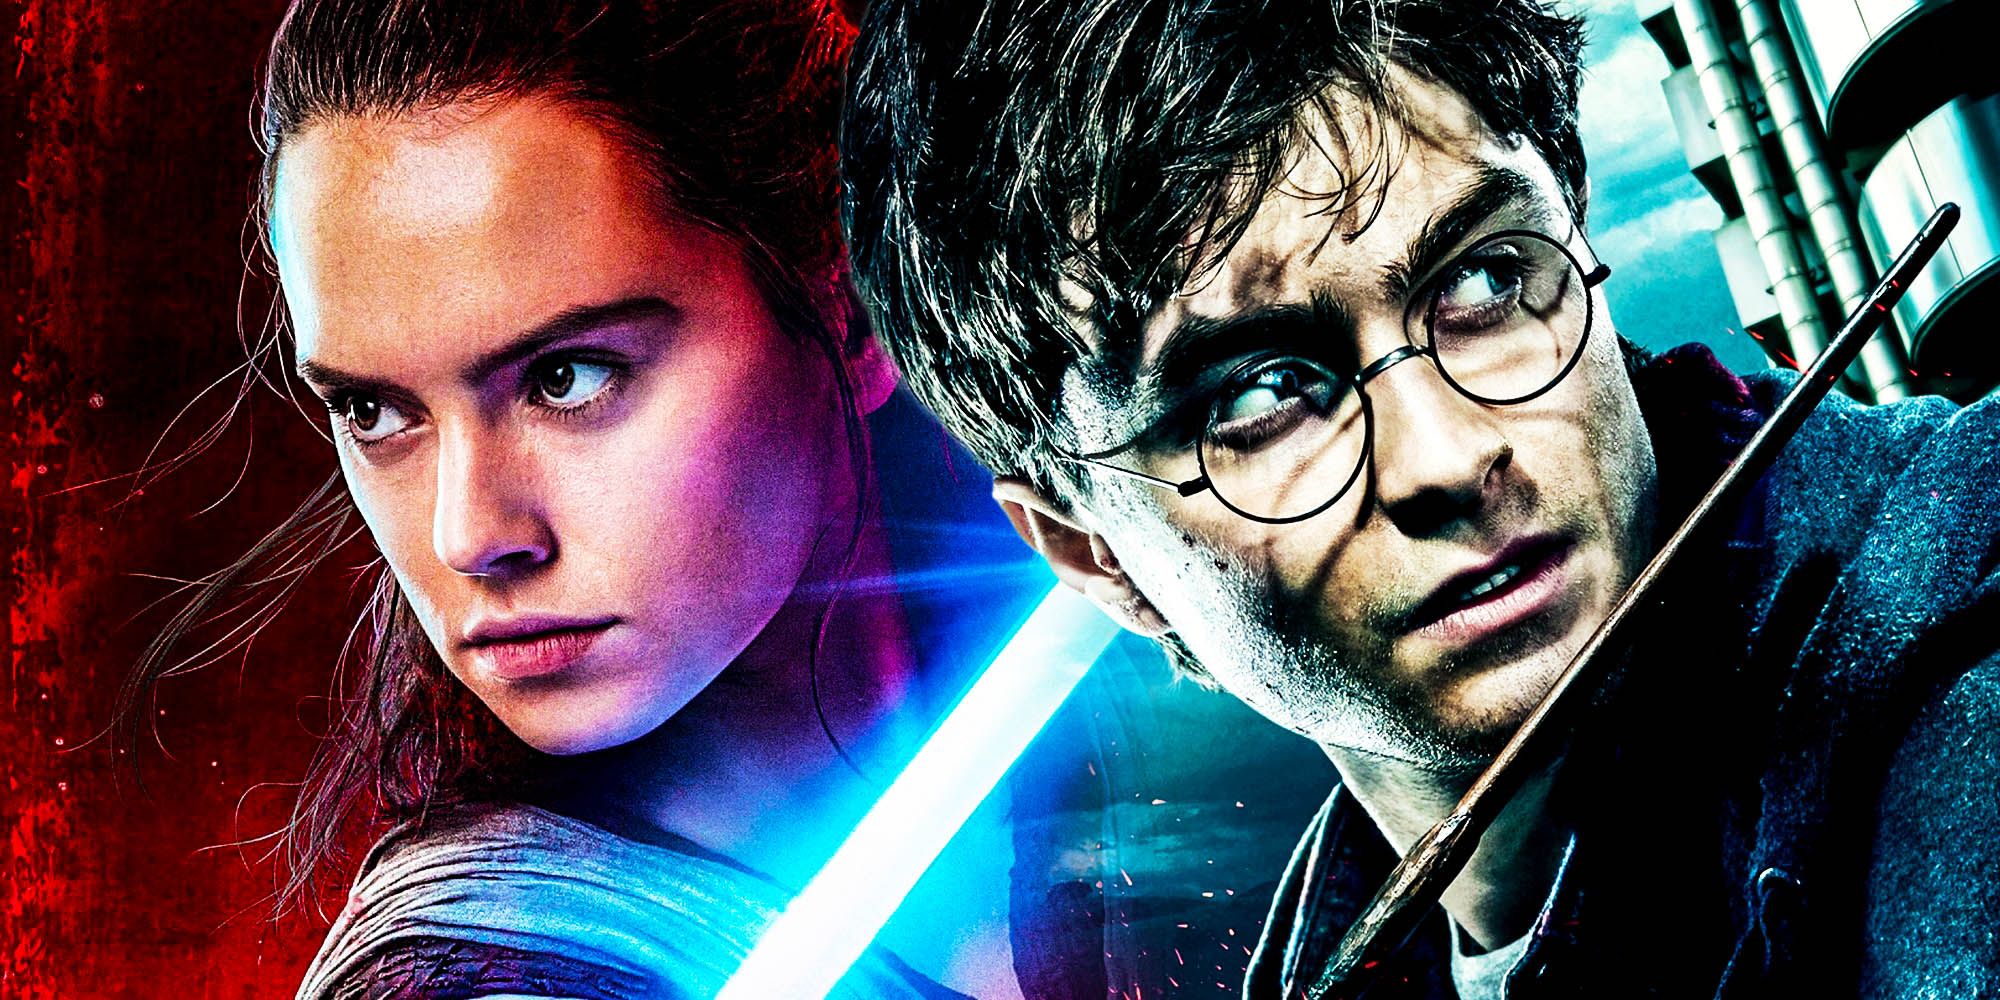 Harry Potters SpinOff Movies Have The Same Problem As Star Wars